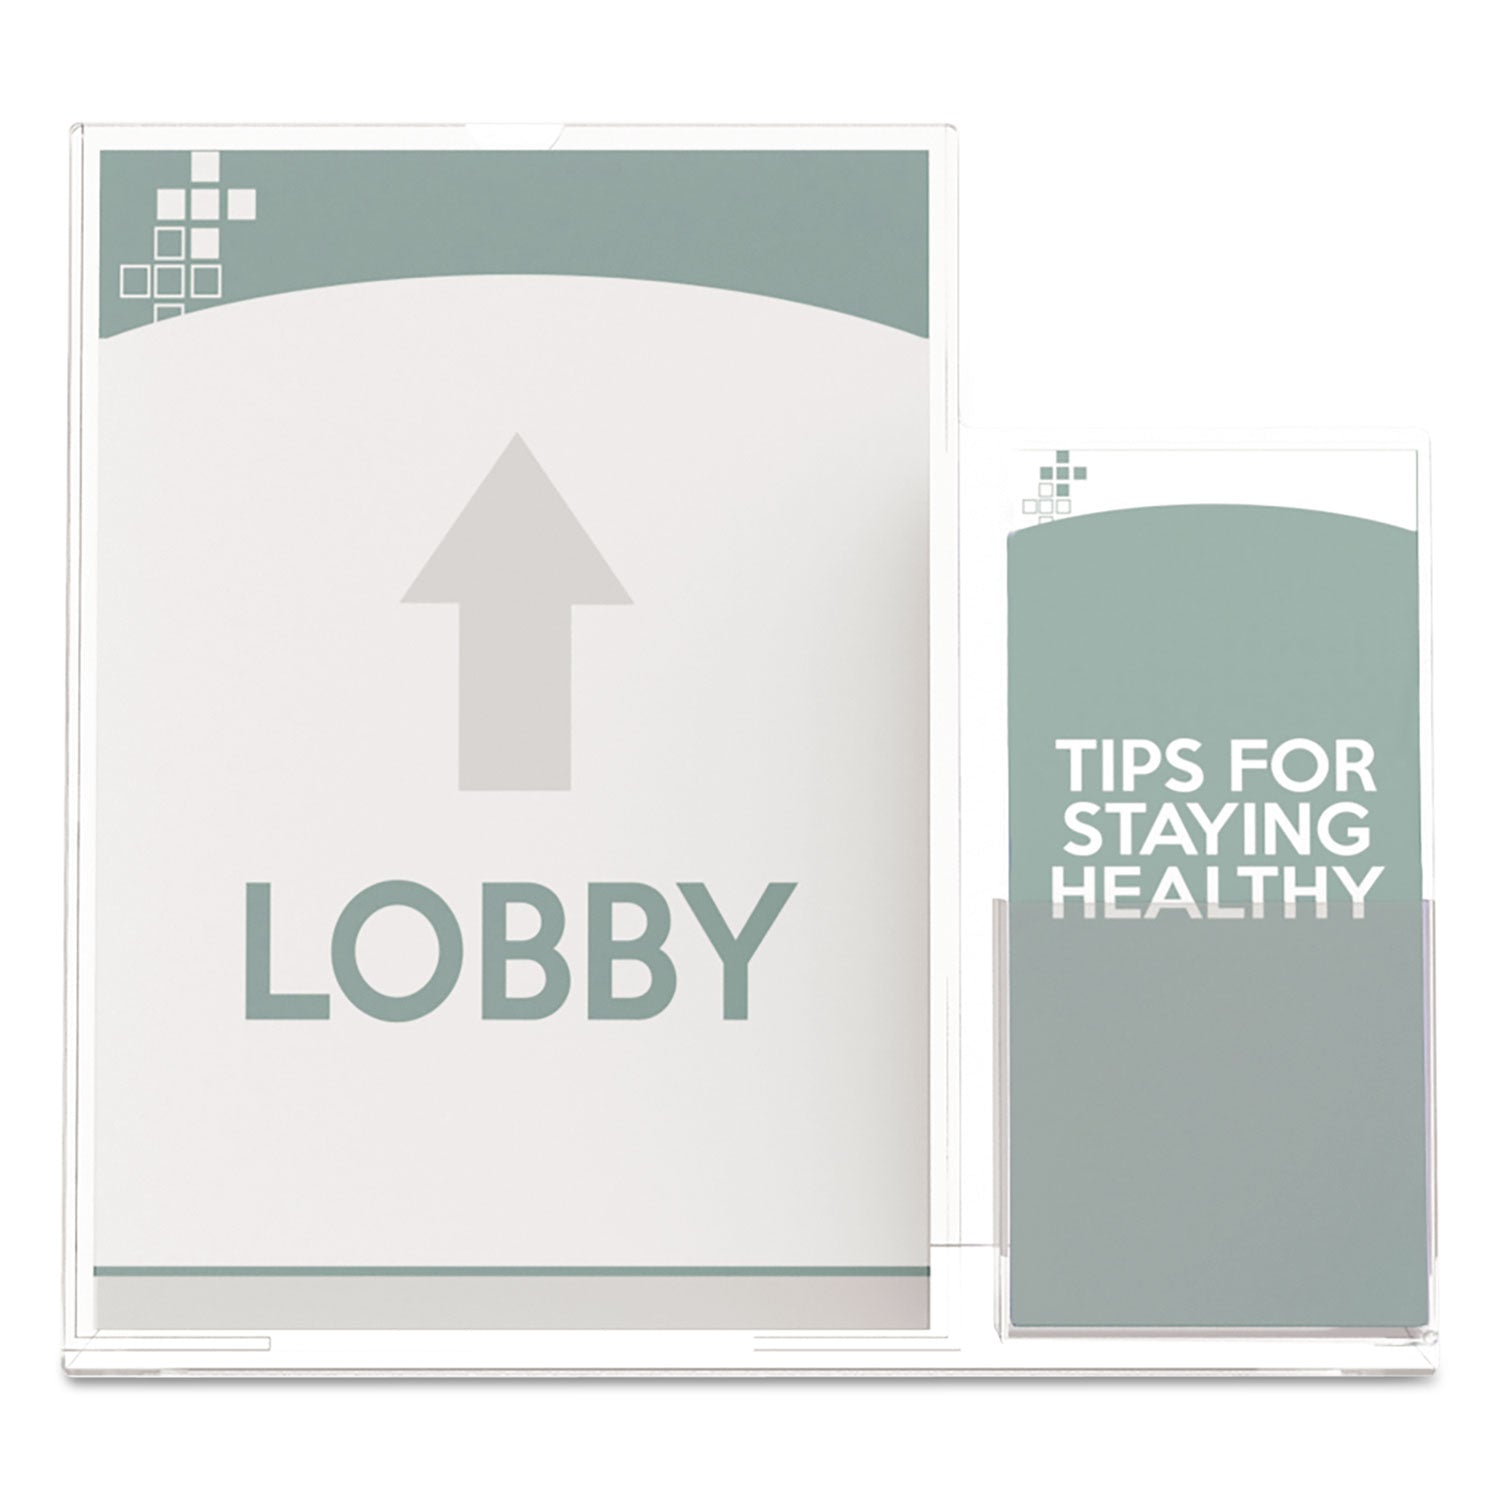 Superior Image Slanted Sign Holder with Side Pocket, 13.5w x 4.25d x 10.88h, Clear - 